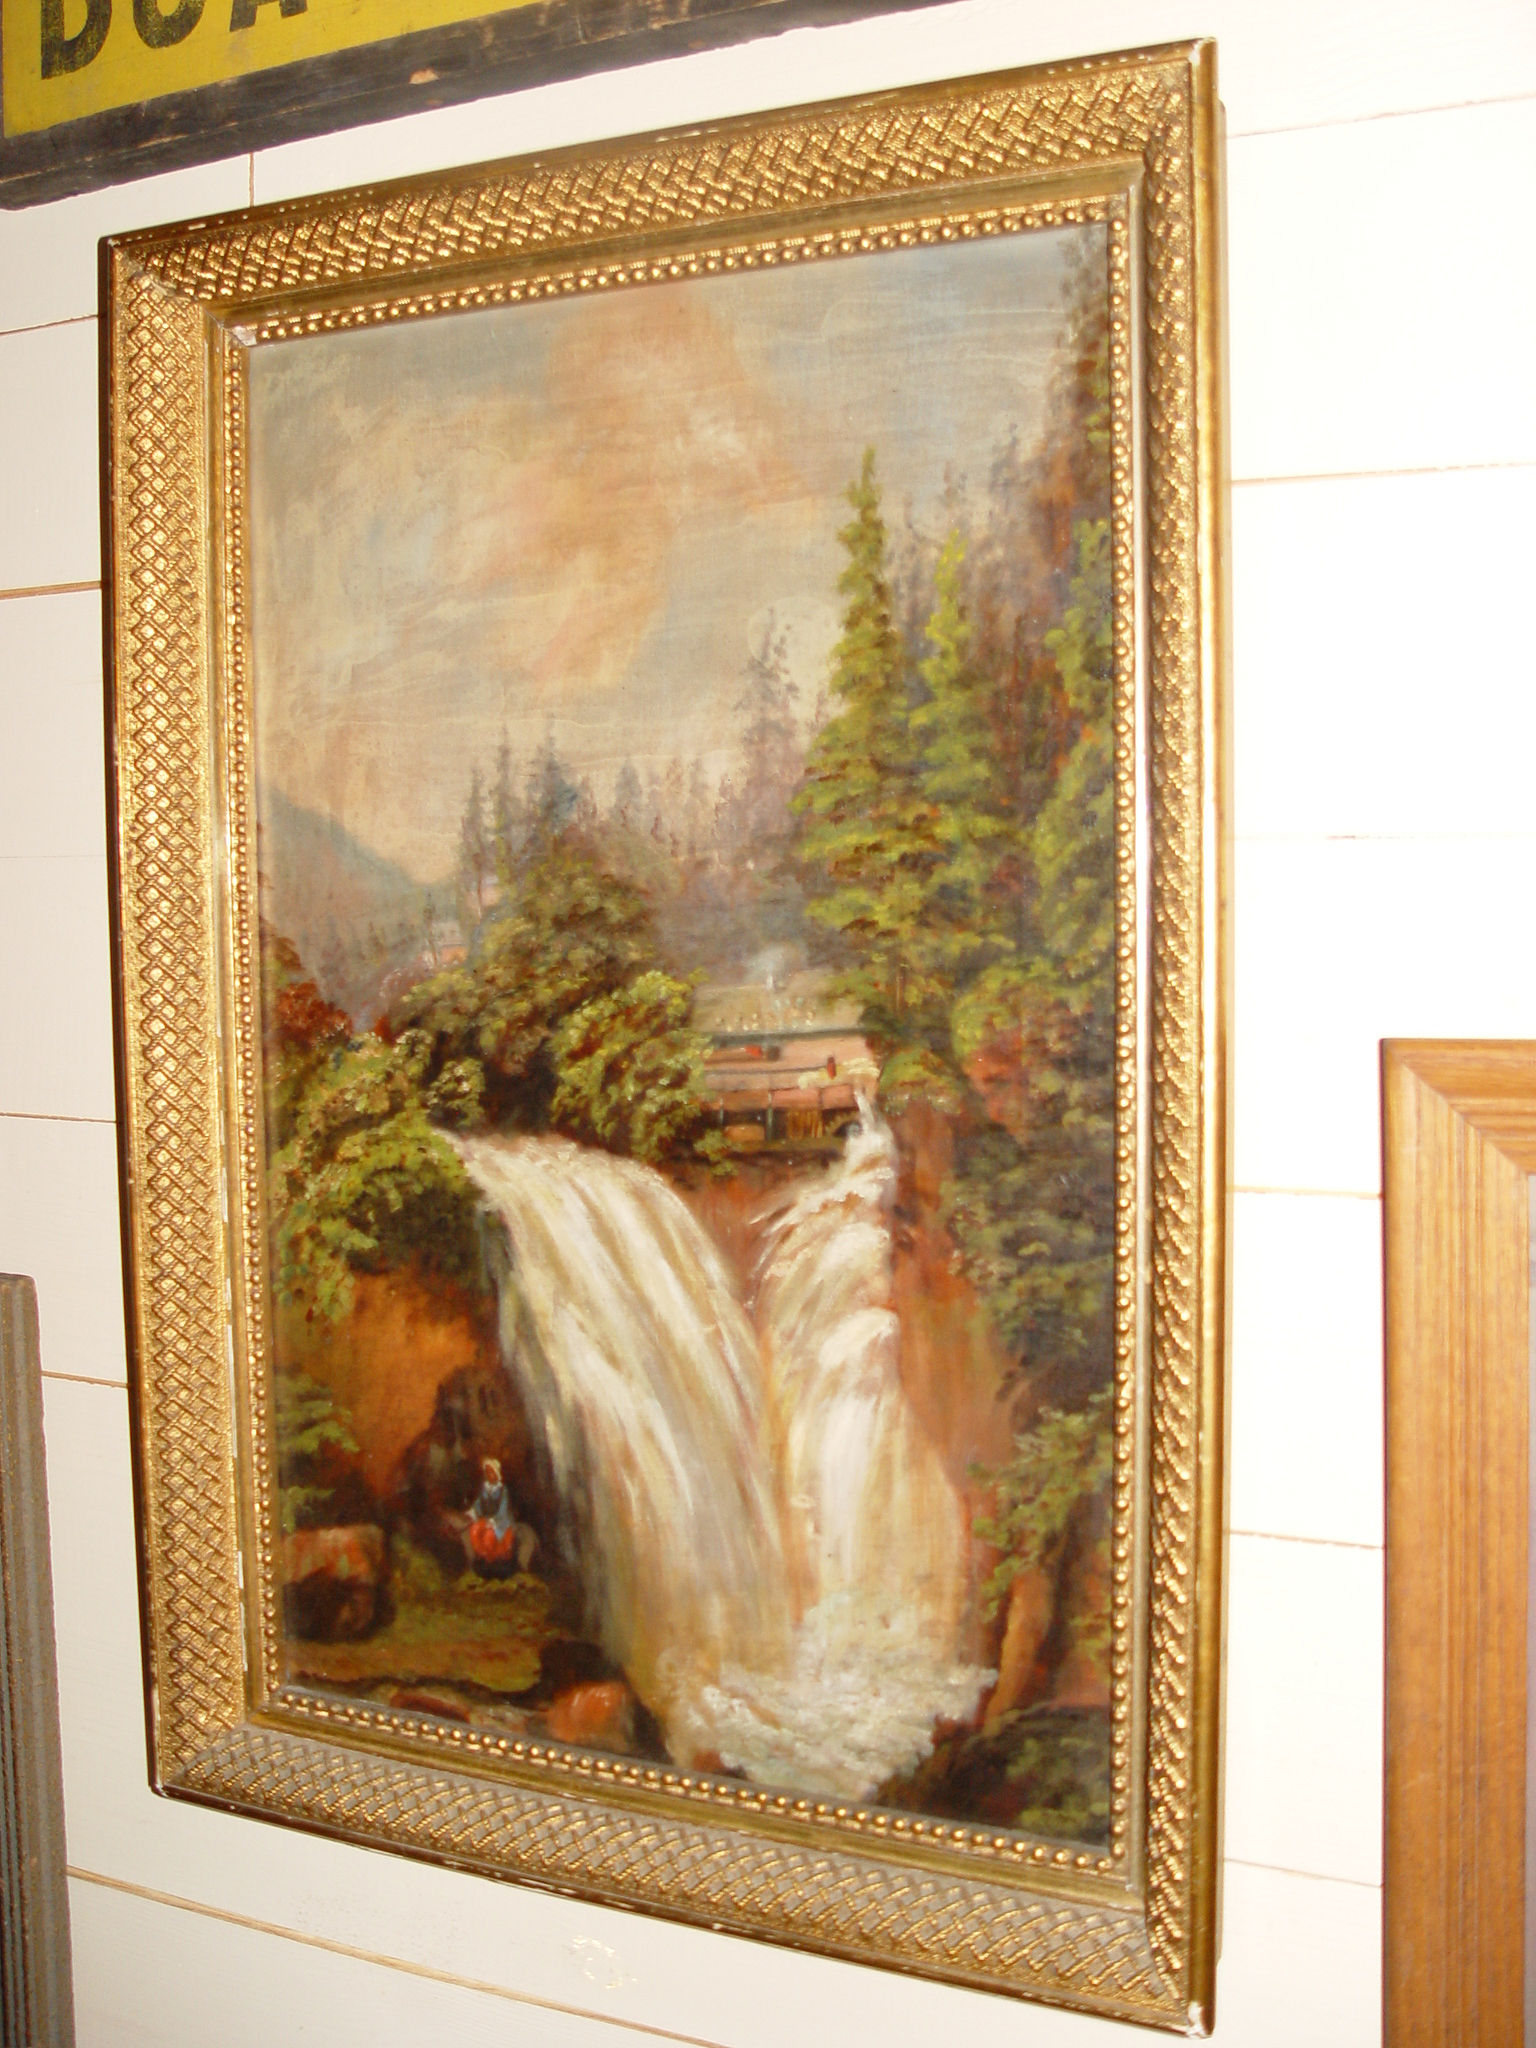 19th c. oil on canvas,
                                        waterfall, Mill and horseback
                                        rider, Mill Creek Falls, Ohio?